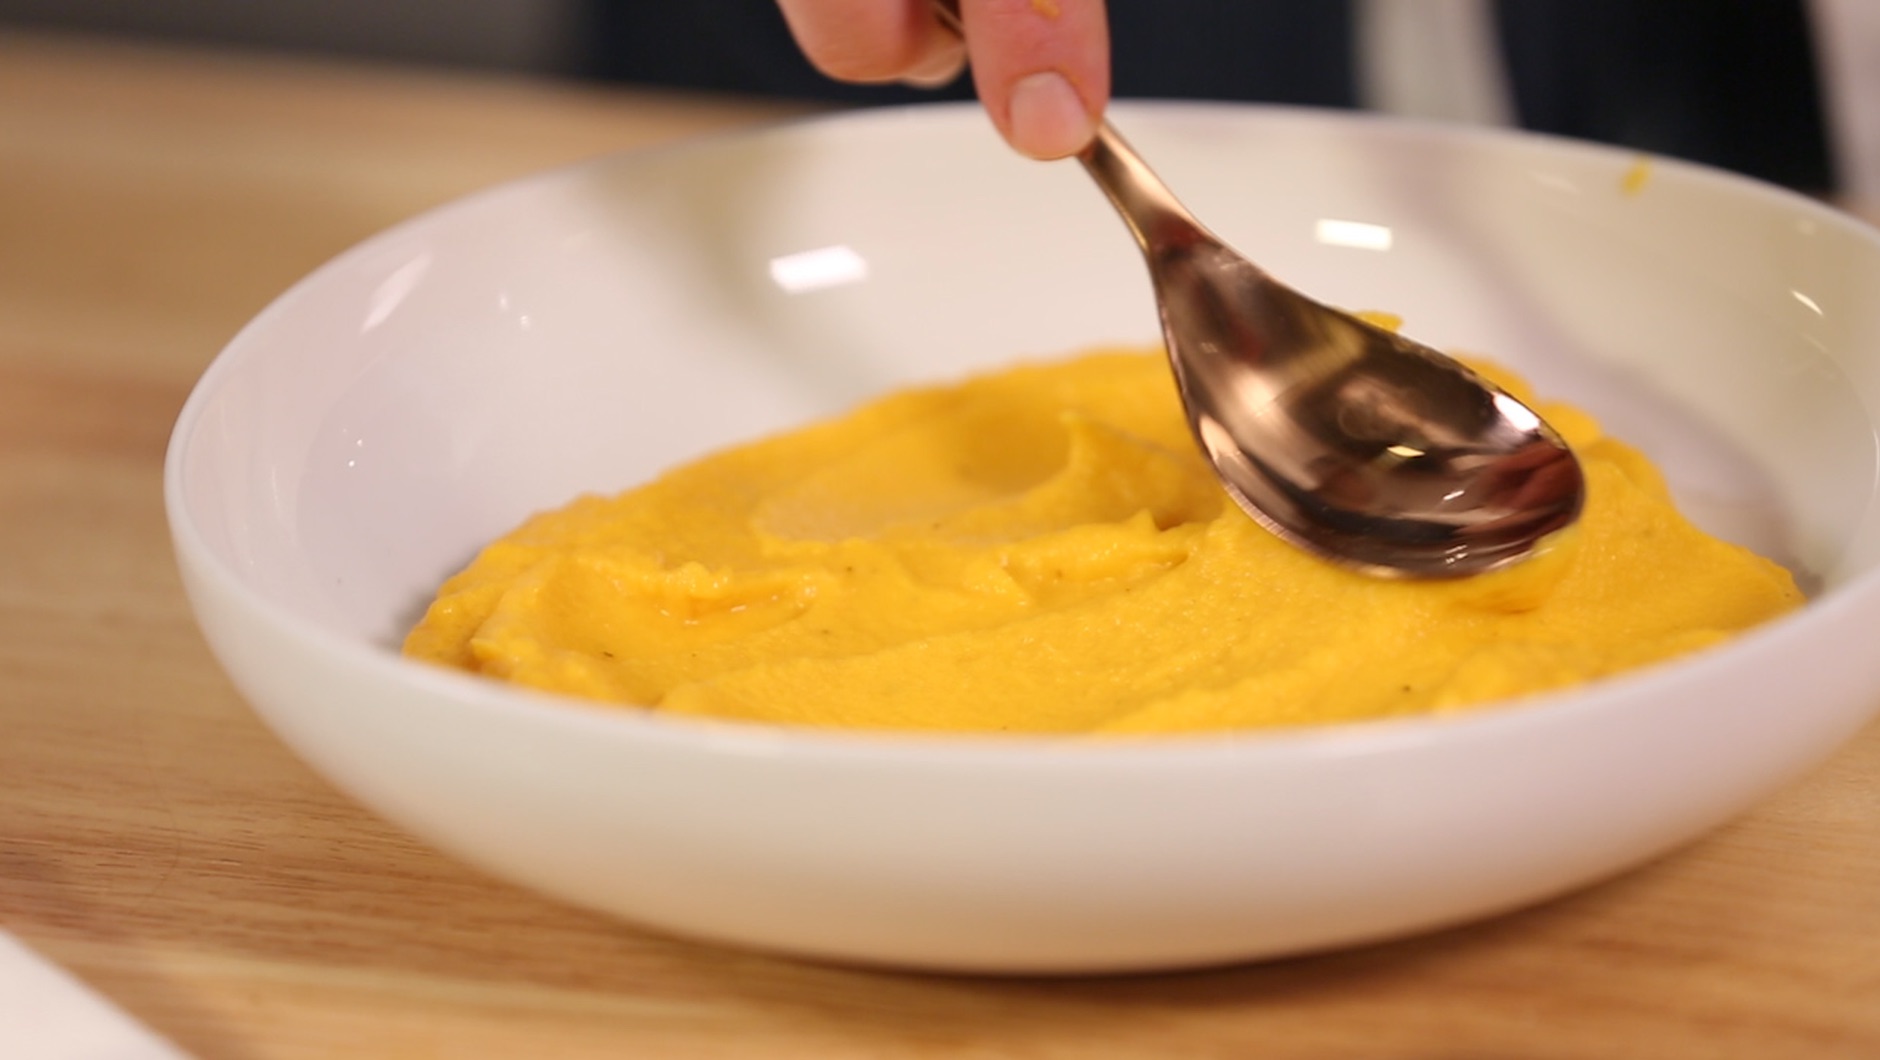 How To Puree Without A Blender